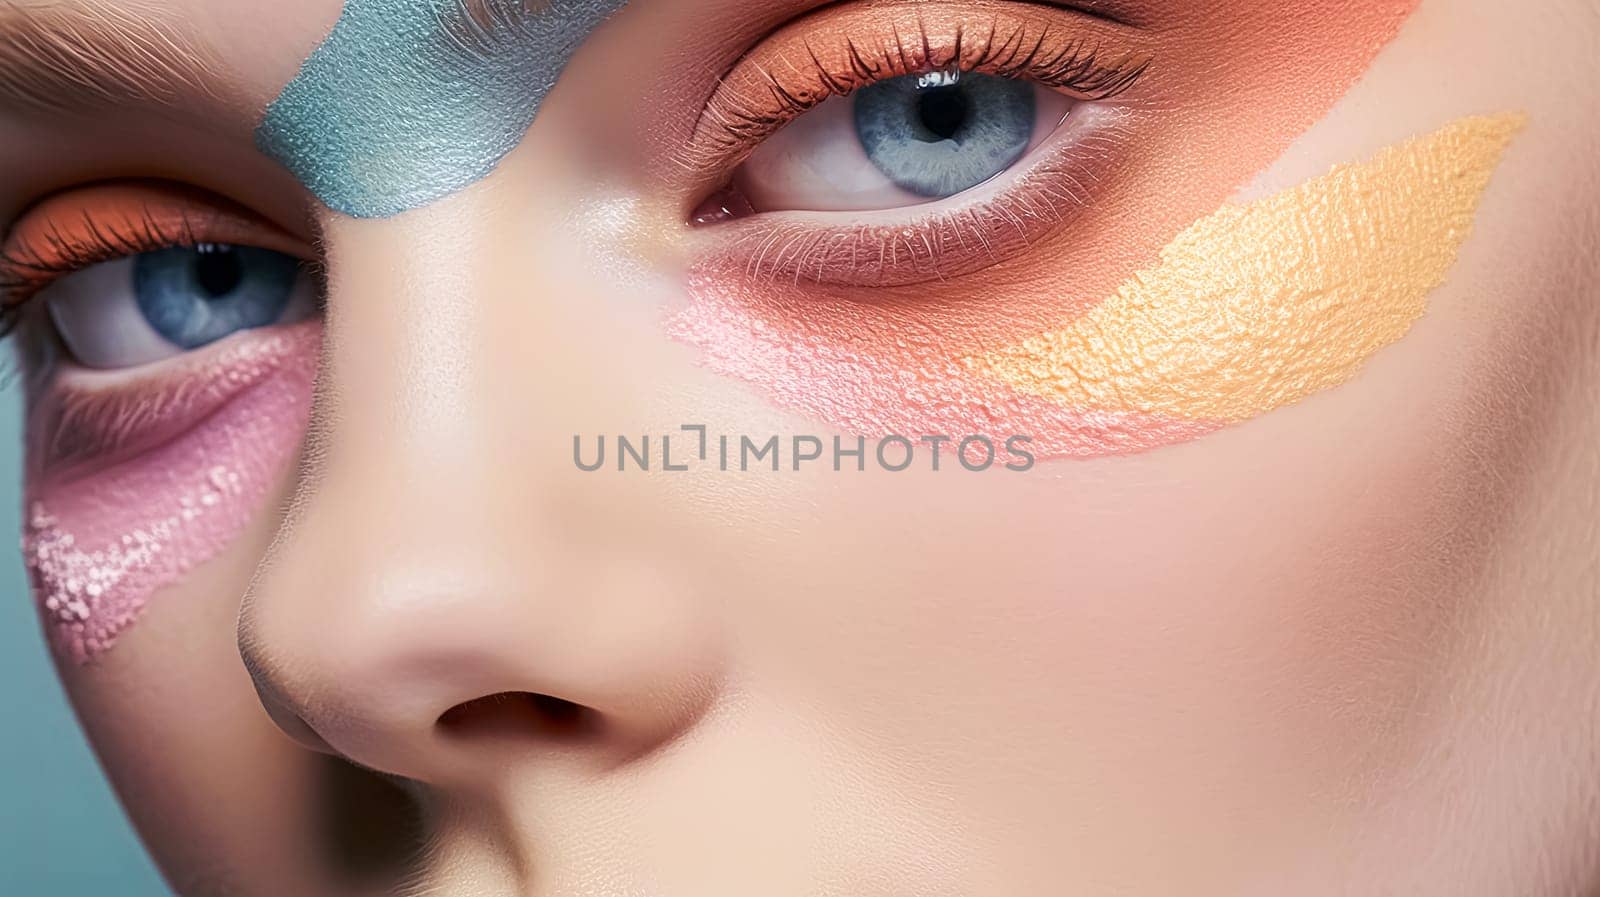 A woman's eye is painted with a colorful feather pattern. The colors are blue, orange, and yellow. The eye is the main focus of the image, and the colors and pattern create a vibrant